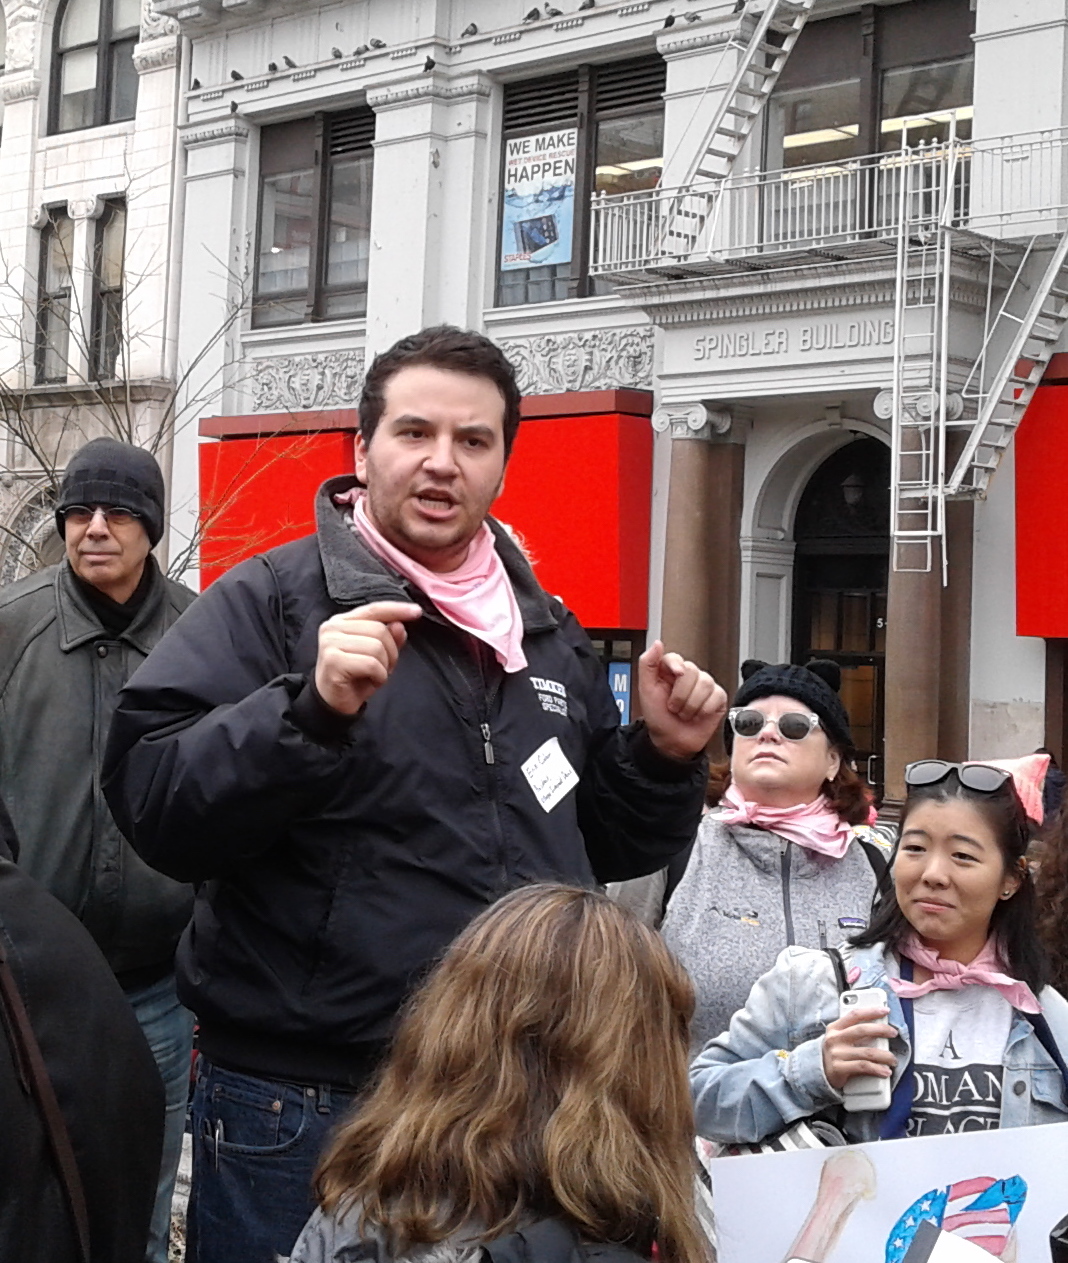 Erik Coler, V.I.D. president, rallies the troops at Union Square before heading up to the Women's March. Photos by Lincoln Anderson